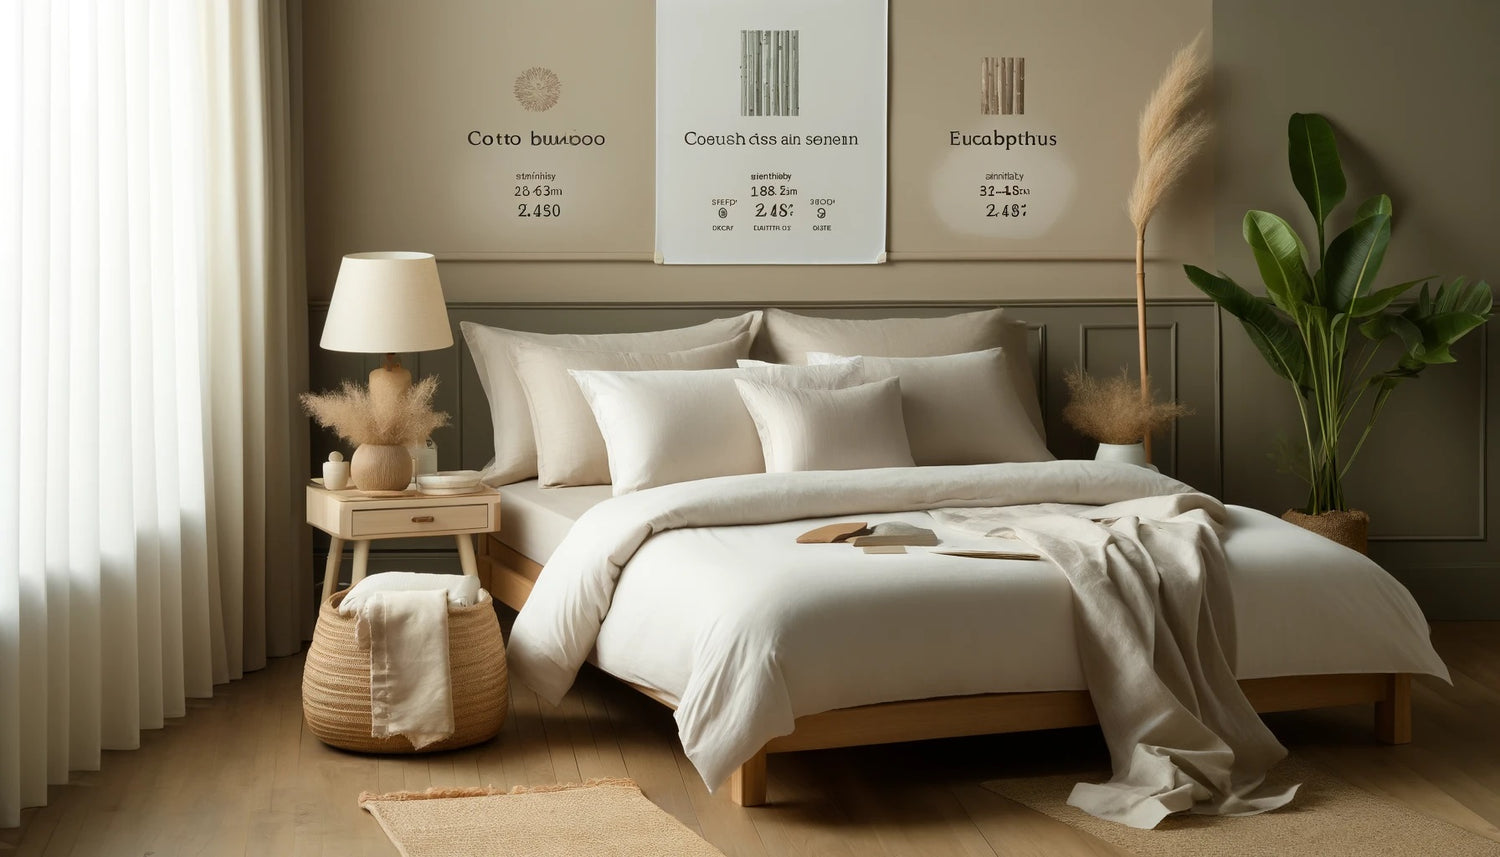 A luxurious bedroom setting featuring a neatly made bed with cotton and linen bed sheets. 